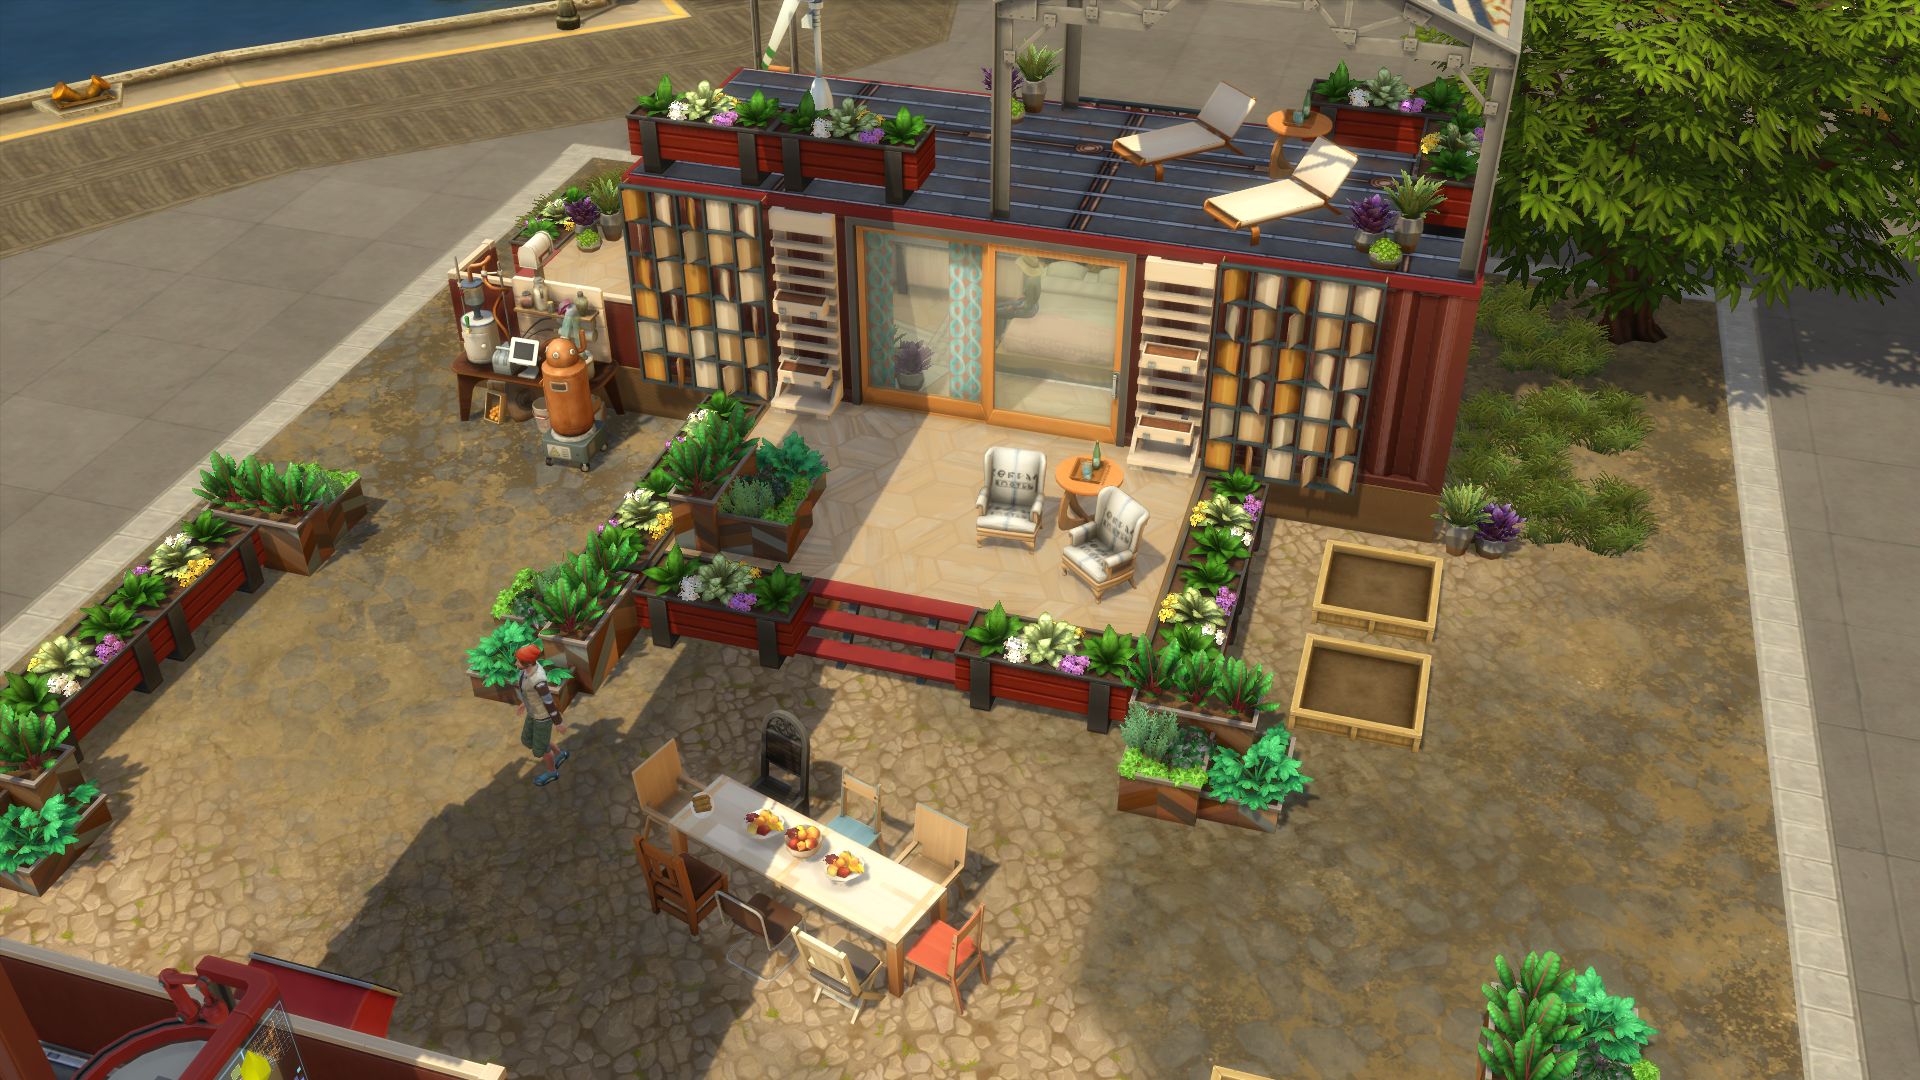 N.A.P. Issues with Sims 4 Eco Lifestyle – Maple Simmer